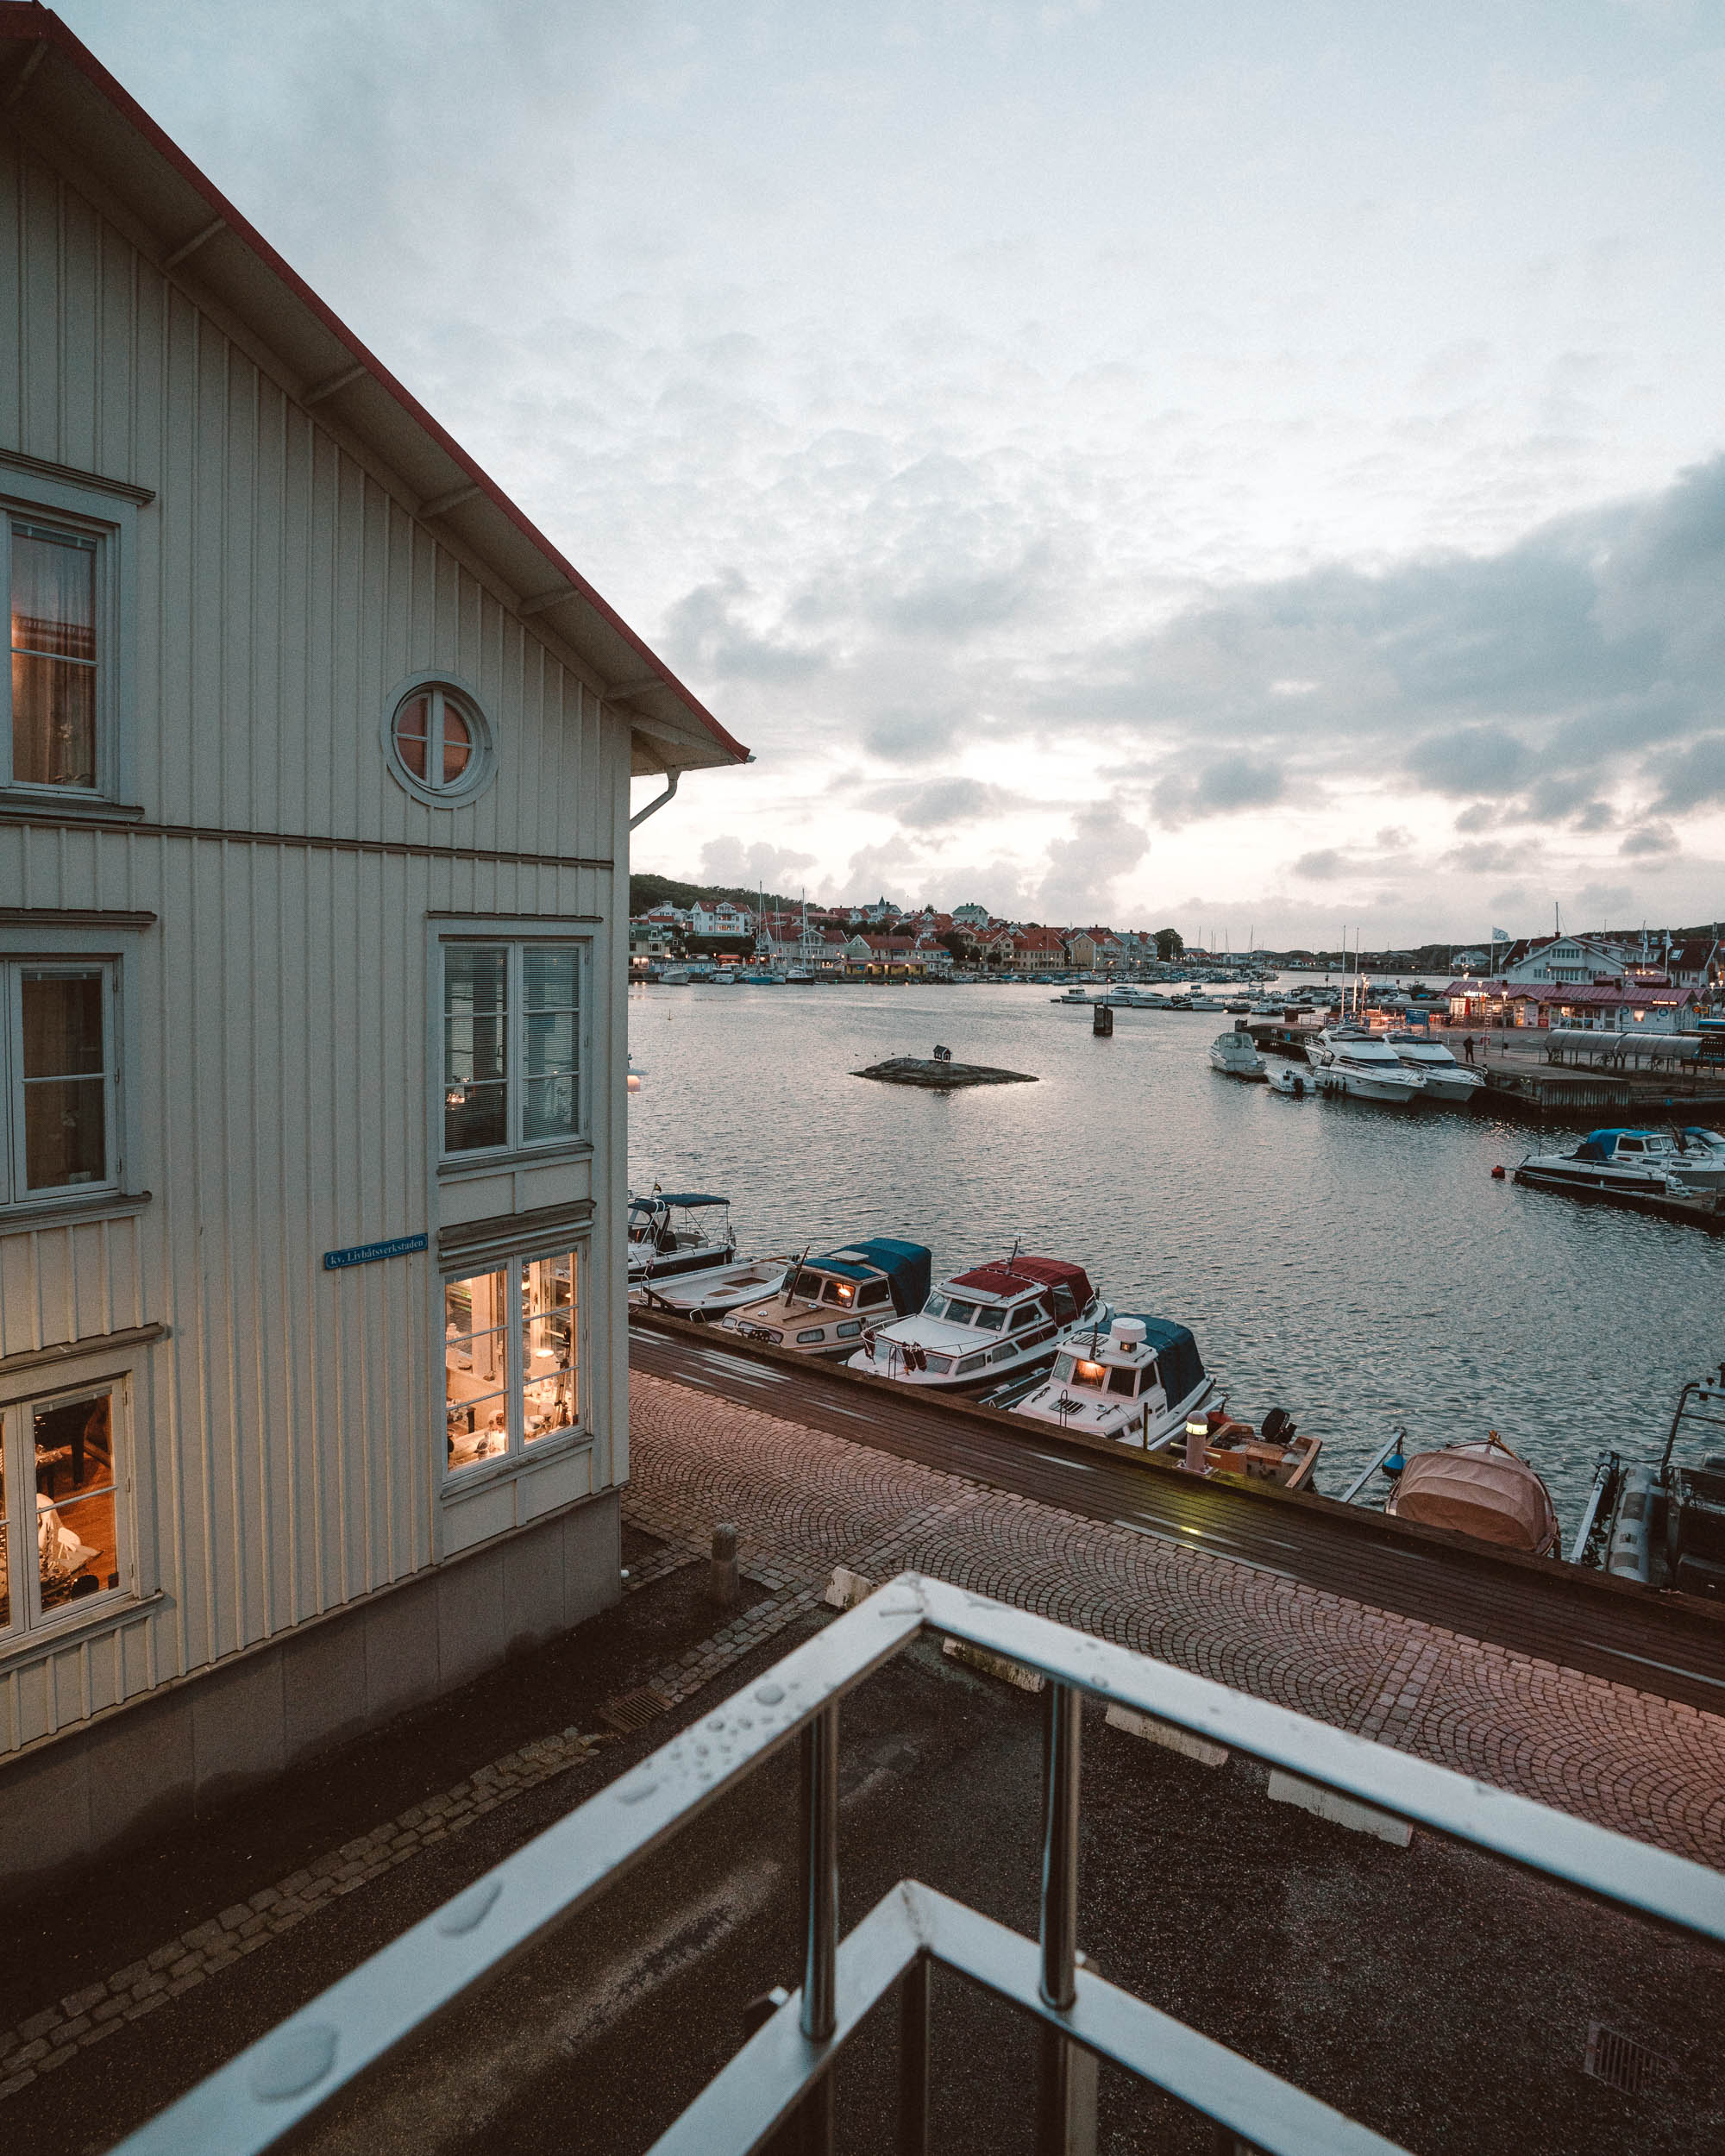 Marstrand island views at sunset on the Swedish coast | West Sweden Travel Guide via @finduslost 